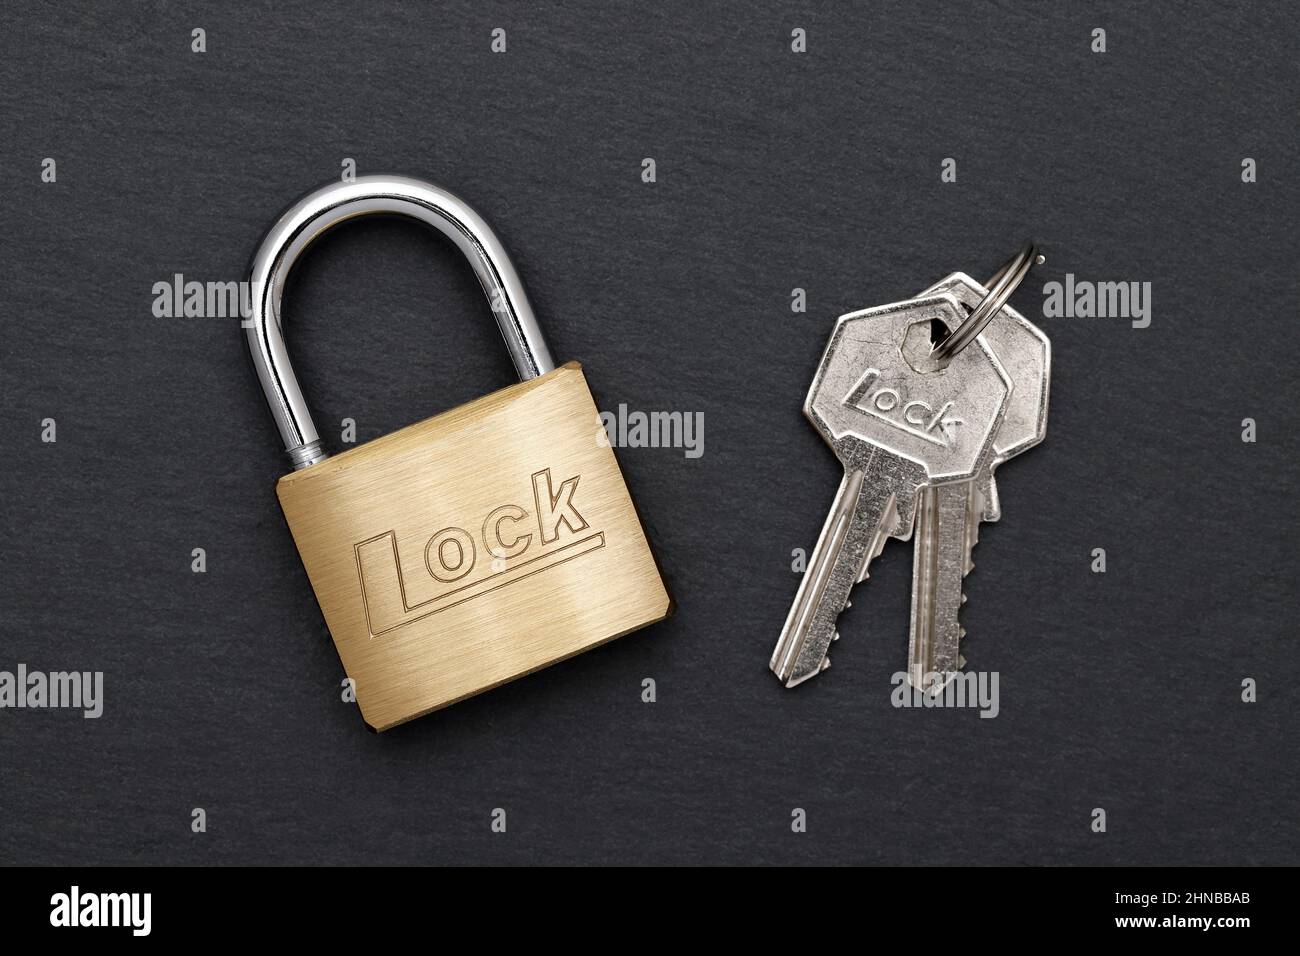 Lock and keys. Closeup of opened metal padlock with key inside isolated on  a white background. Macro photograph of metal lock with keys Stock Photo -  Alamy